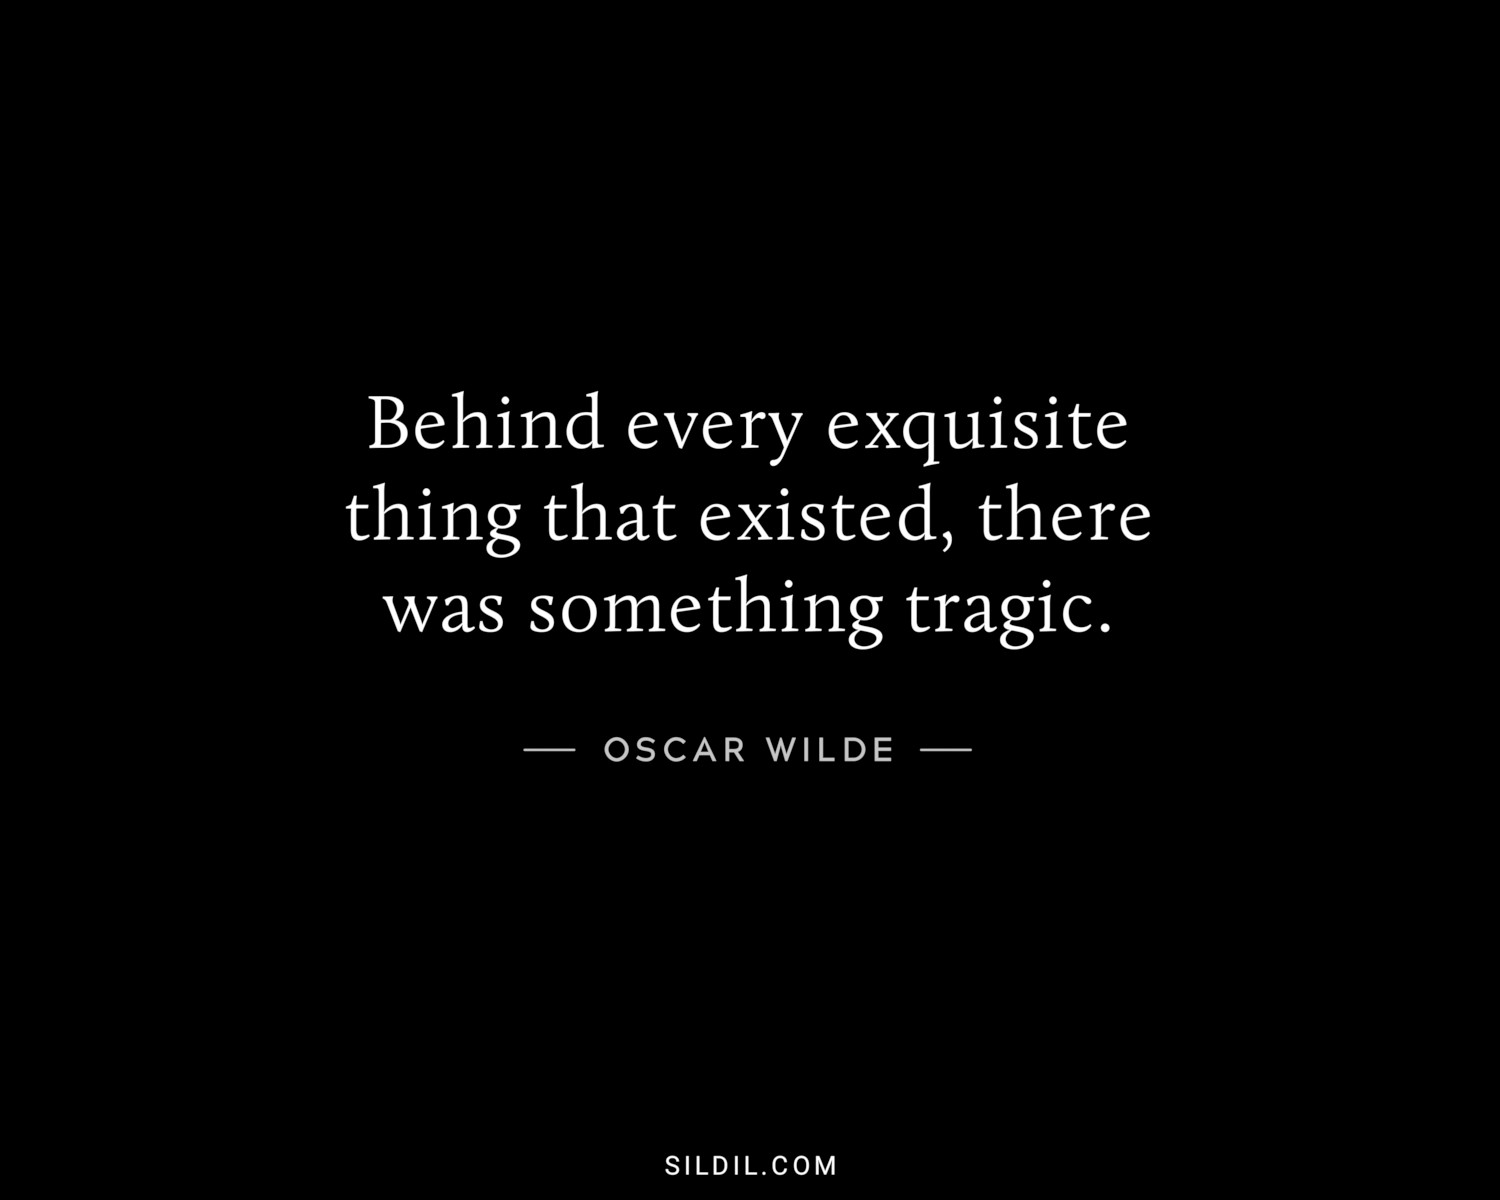 Behind every exquisite thing that existed, there was something tragic.